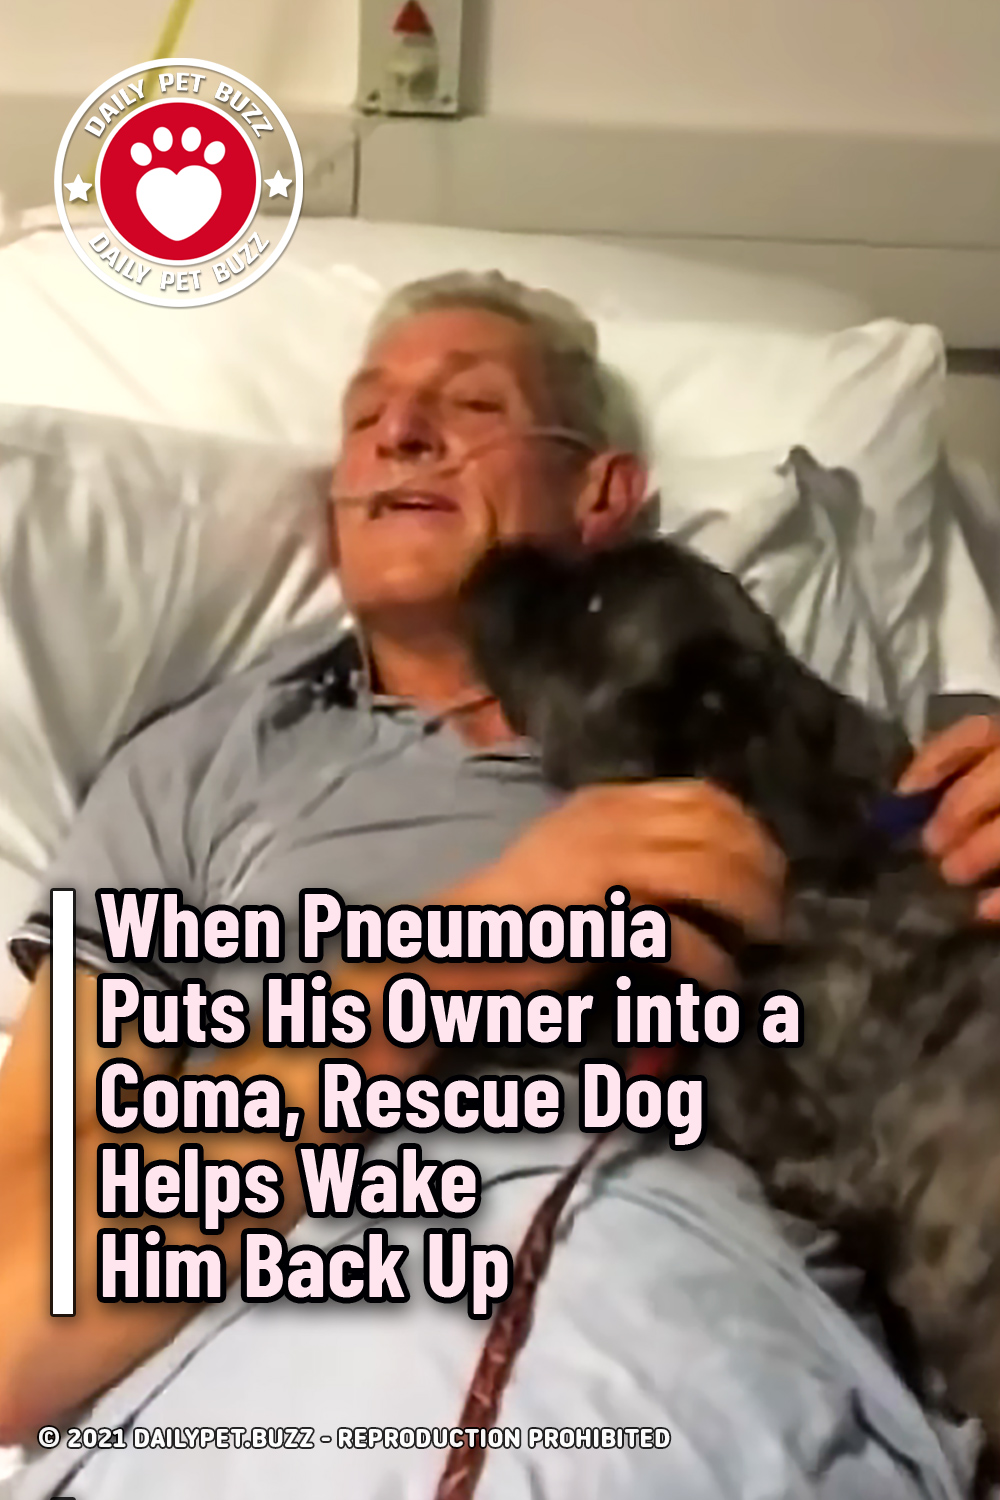 When Pneumonia Puts His Owner into a Coma, Rescue Dog Helps Wake Him Back Up